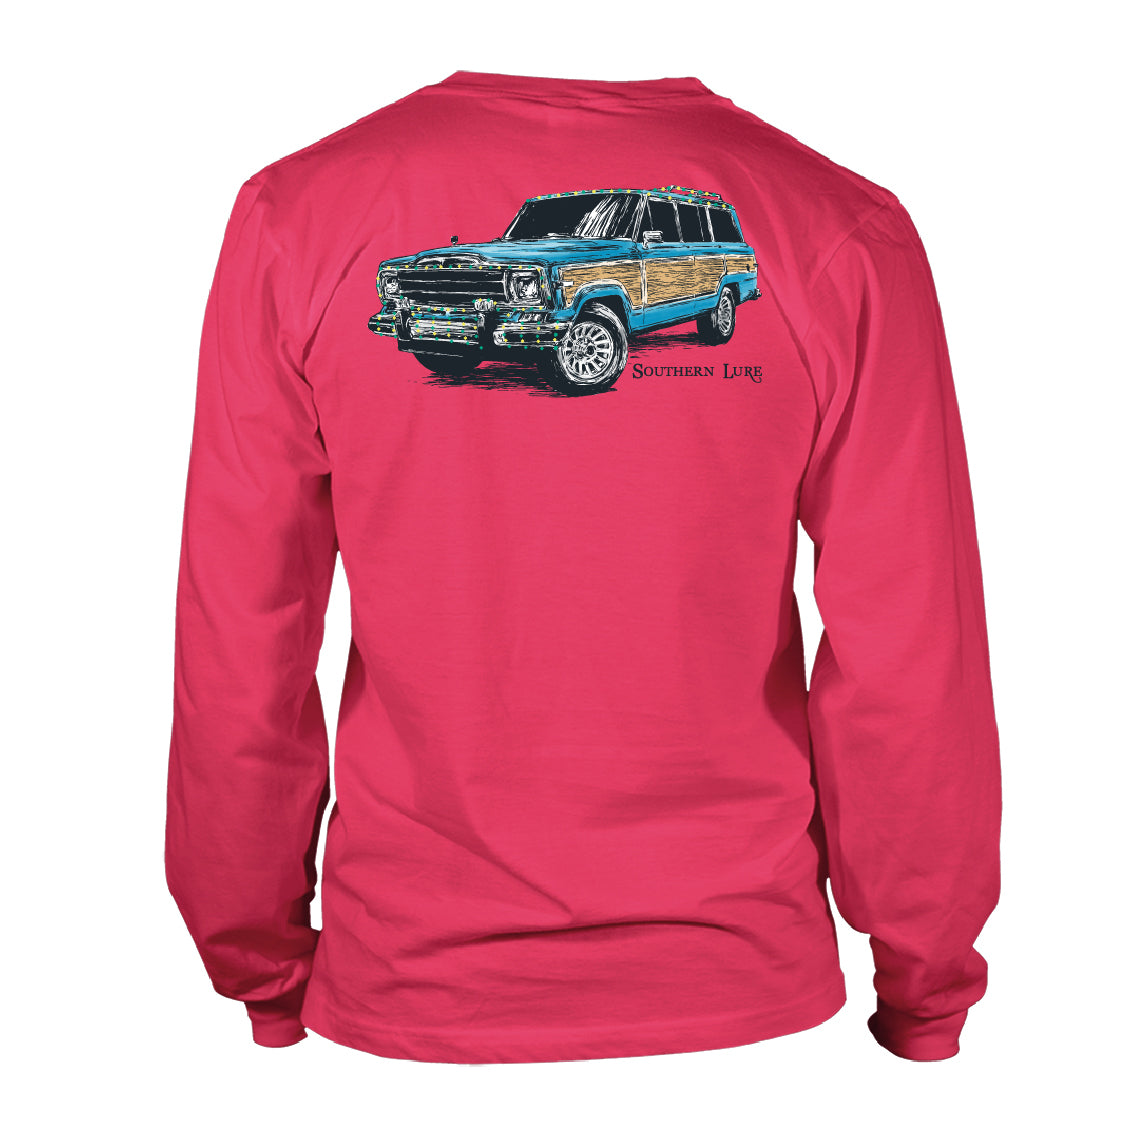 Youth & Toddler Long Sleeve Tee - Xmas Jeep - Red